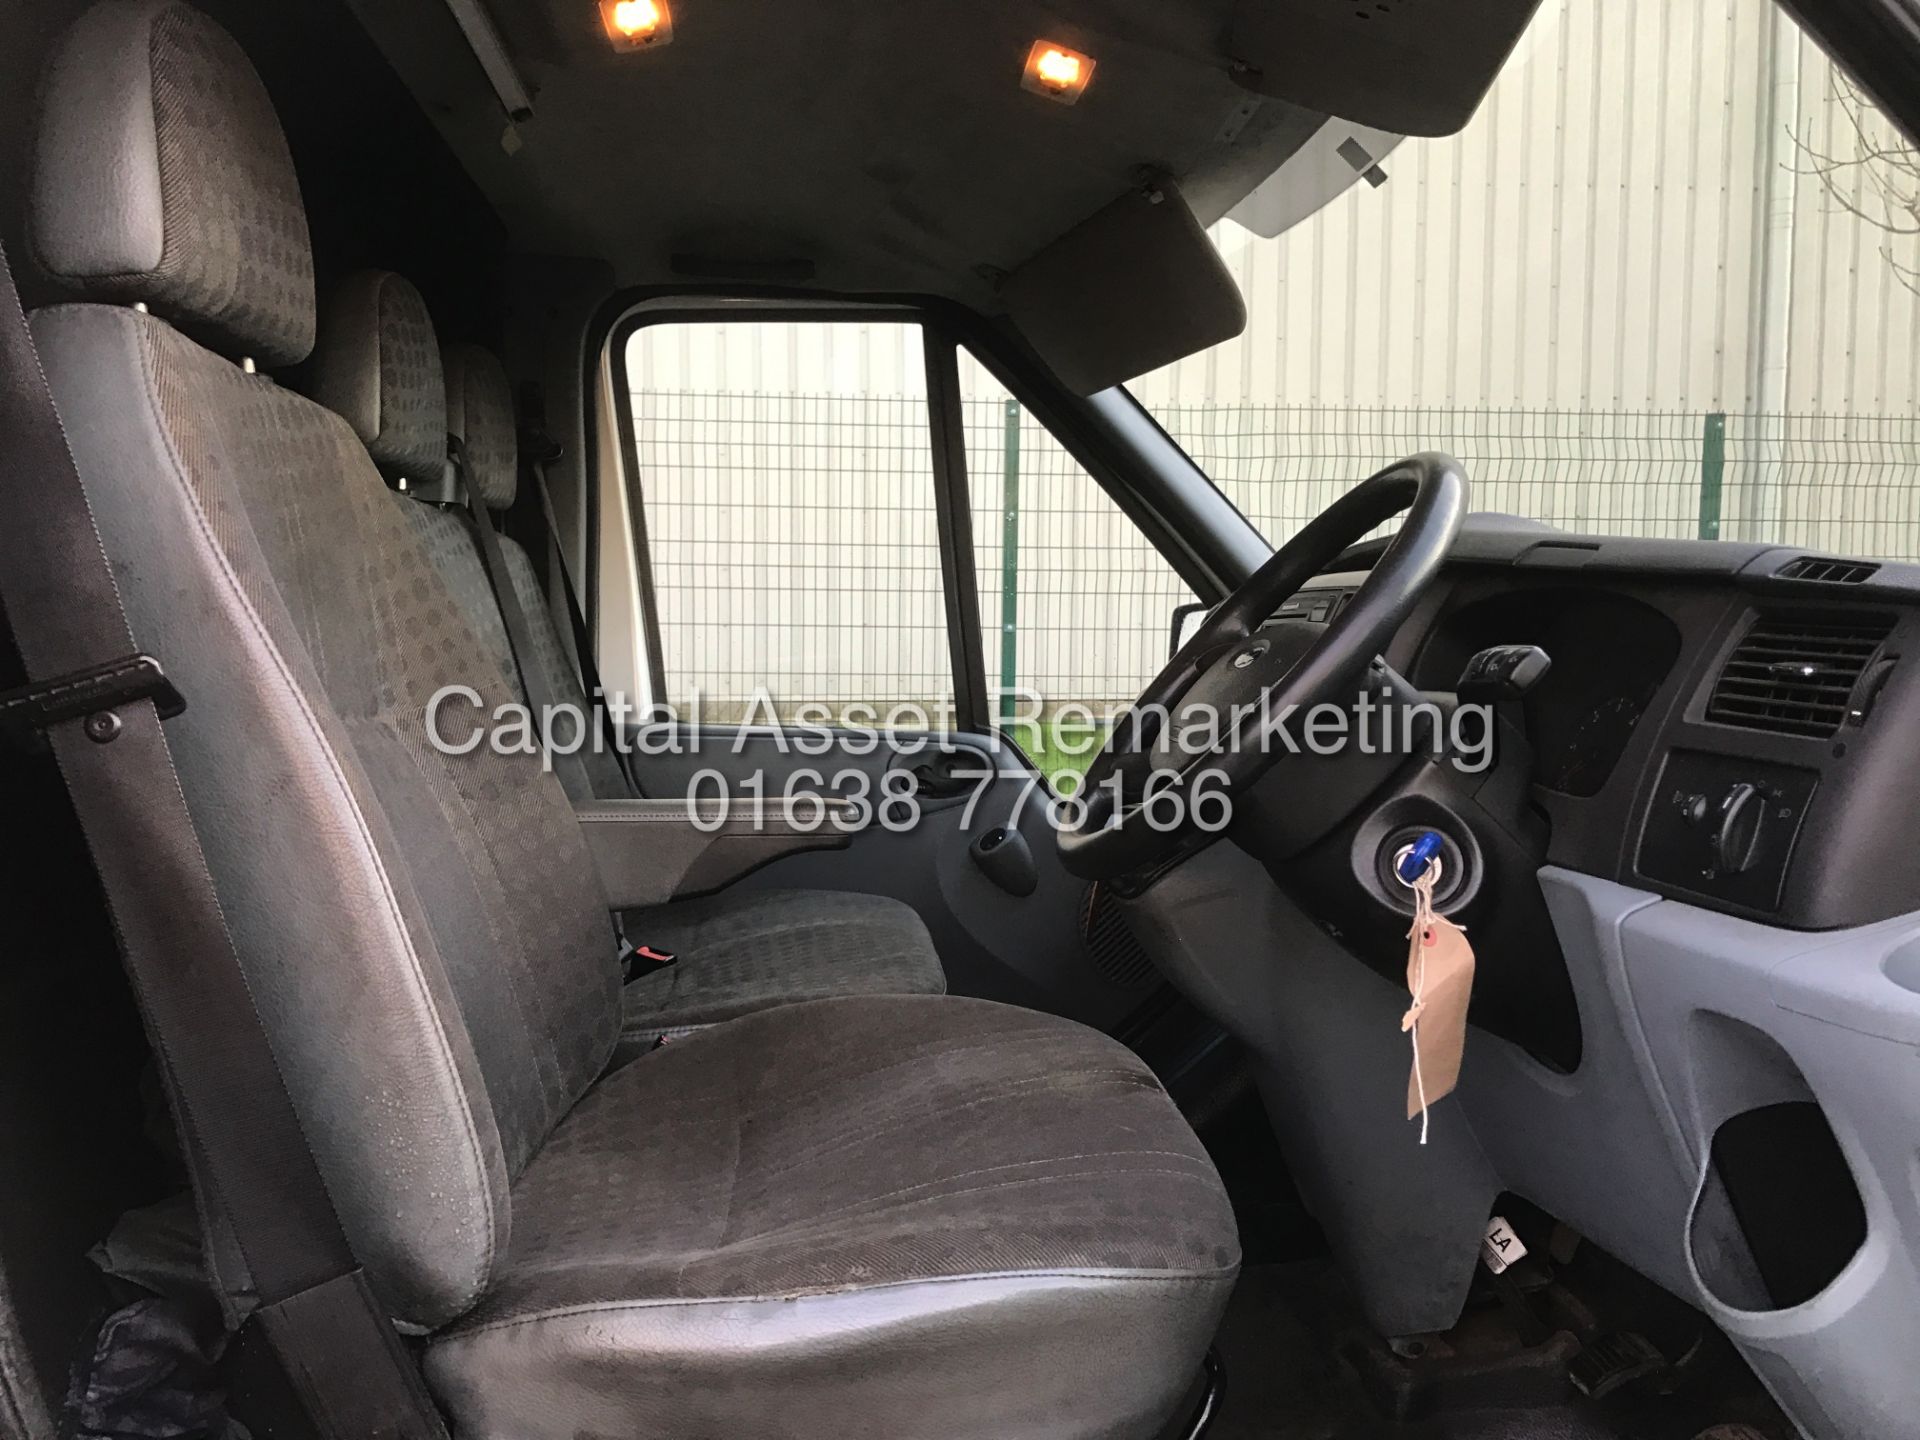 FORD TRANSIT T350 (125) XLWB "JUMBO" 13 REG - 1 OWNER - LOW MILES - MASSIVE LOADING SPACE - WOW!!! - Image 8 of 13